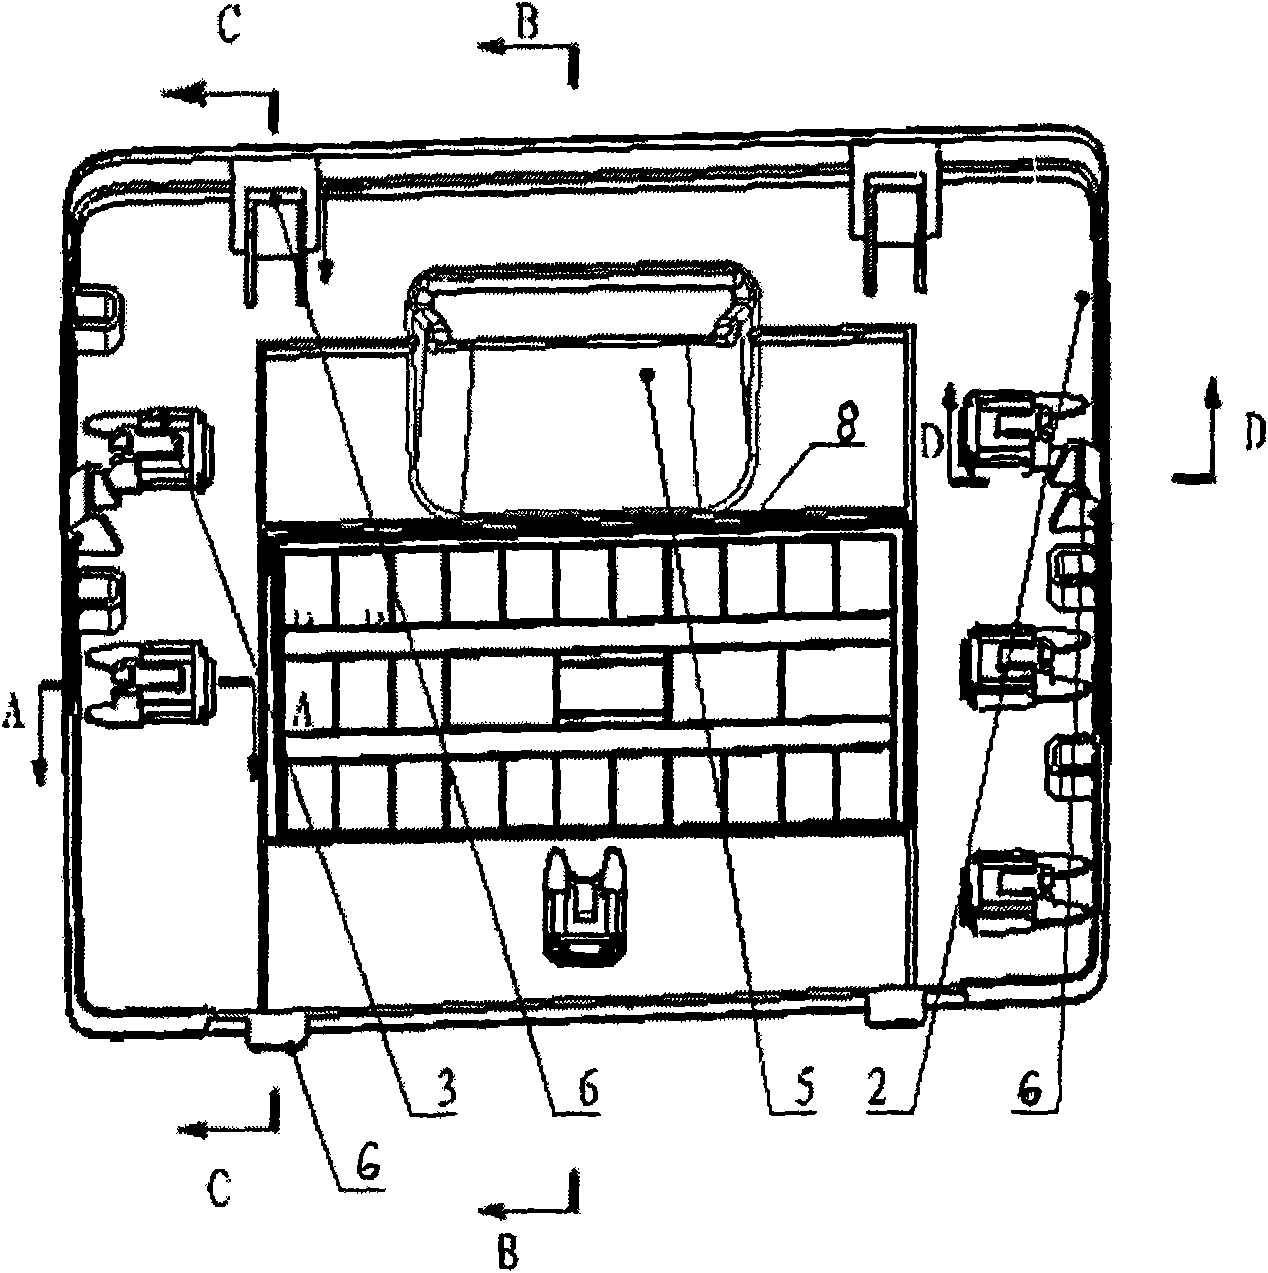 Access cover assembly of automobile fuse box